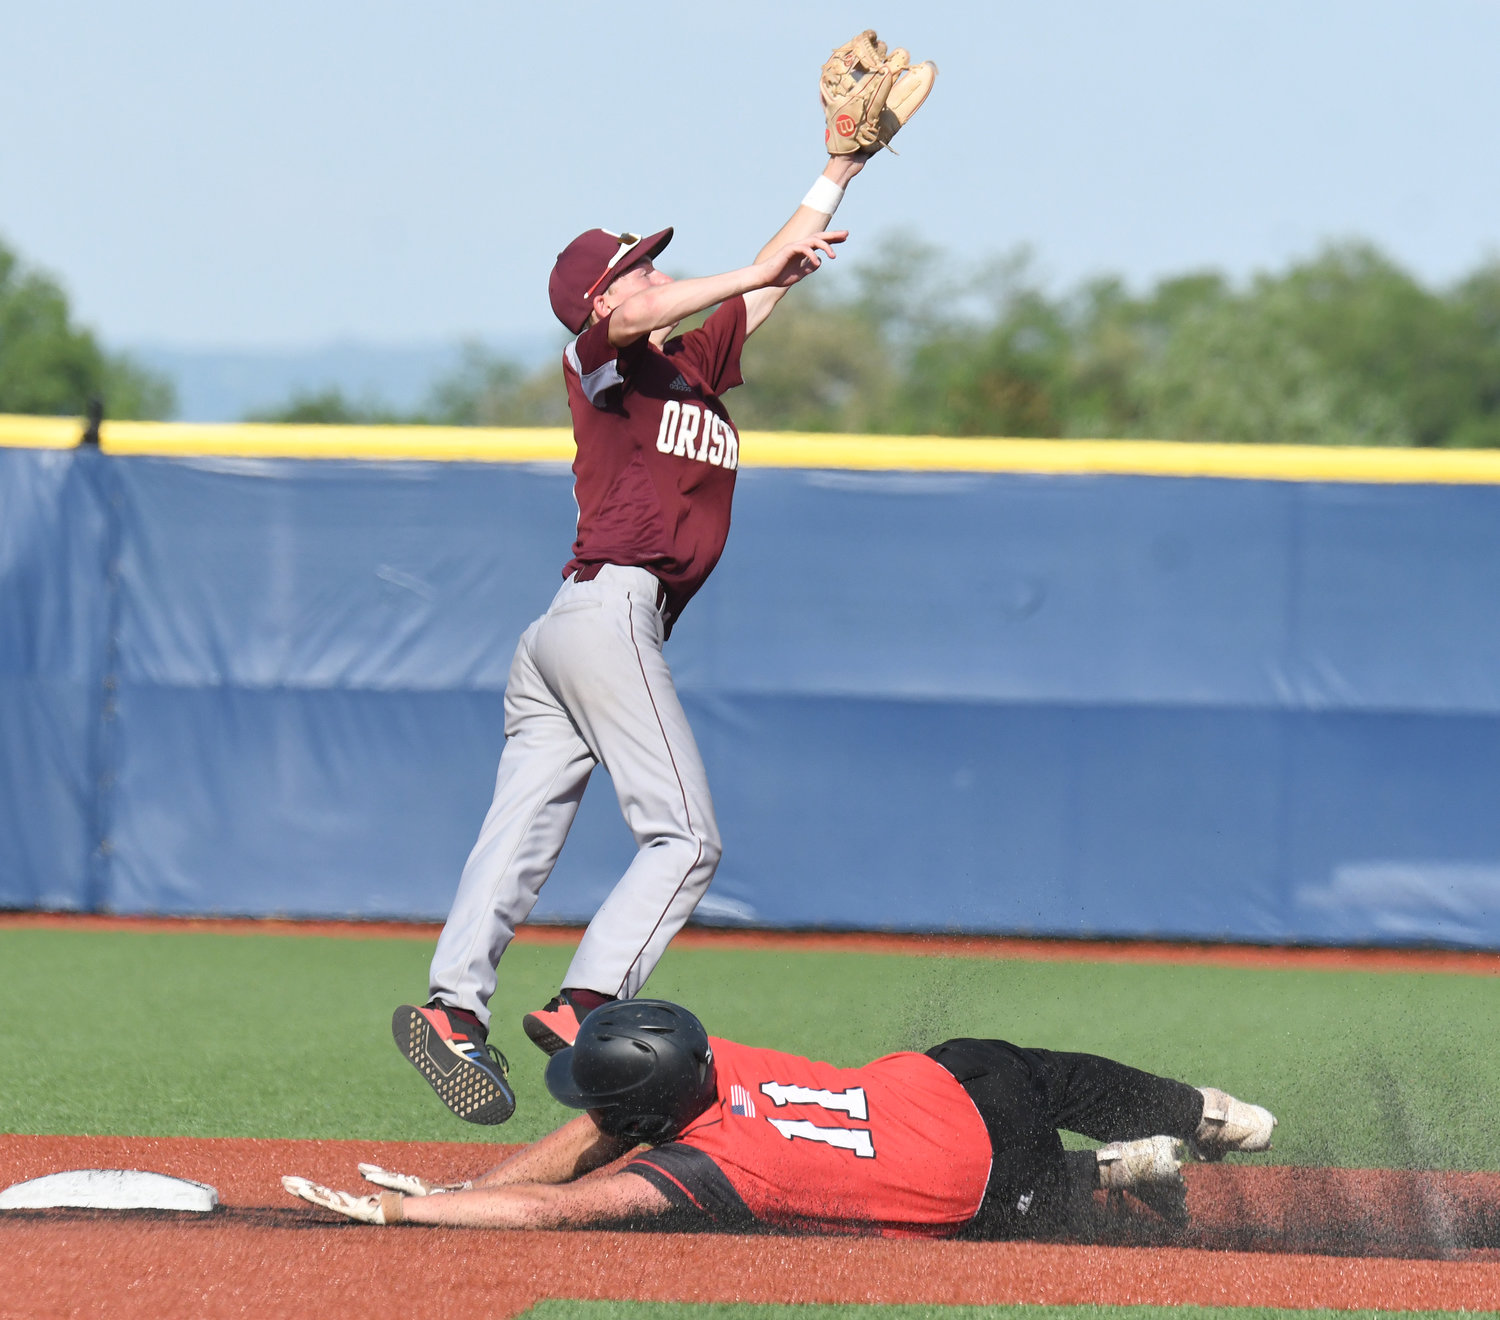 Oriskany senior second baseman Alex Burrows leaps to make a catch as Morrisville-Eaton baserunner Nicholas Brady dives in safety on a stolen base attempt in the fourth inning of Tuesday’s Section III Class D baseball title game at Onondaga Community College. Brady scored in the inning and later drove in the eventual game-winning run, while also throwing a complete game in the Warriors’ 3-2 win.